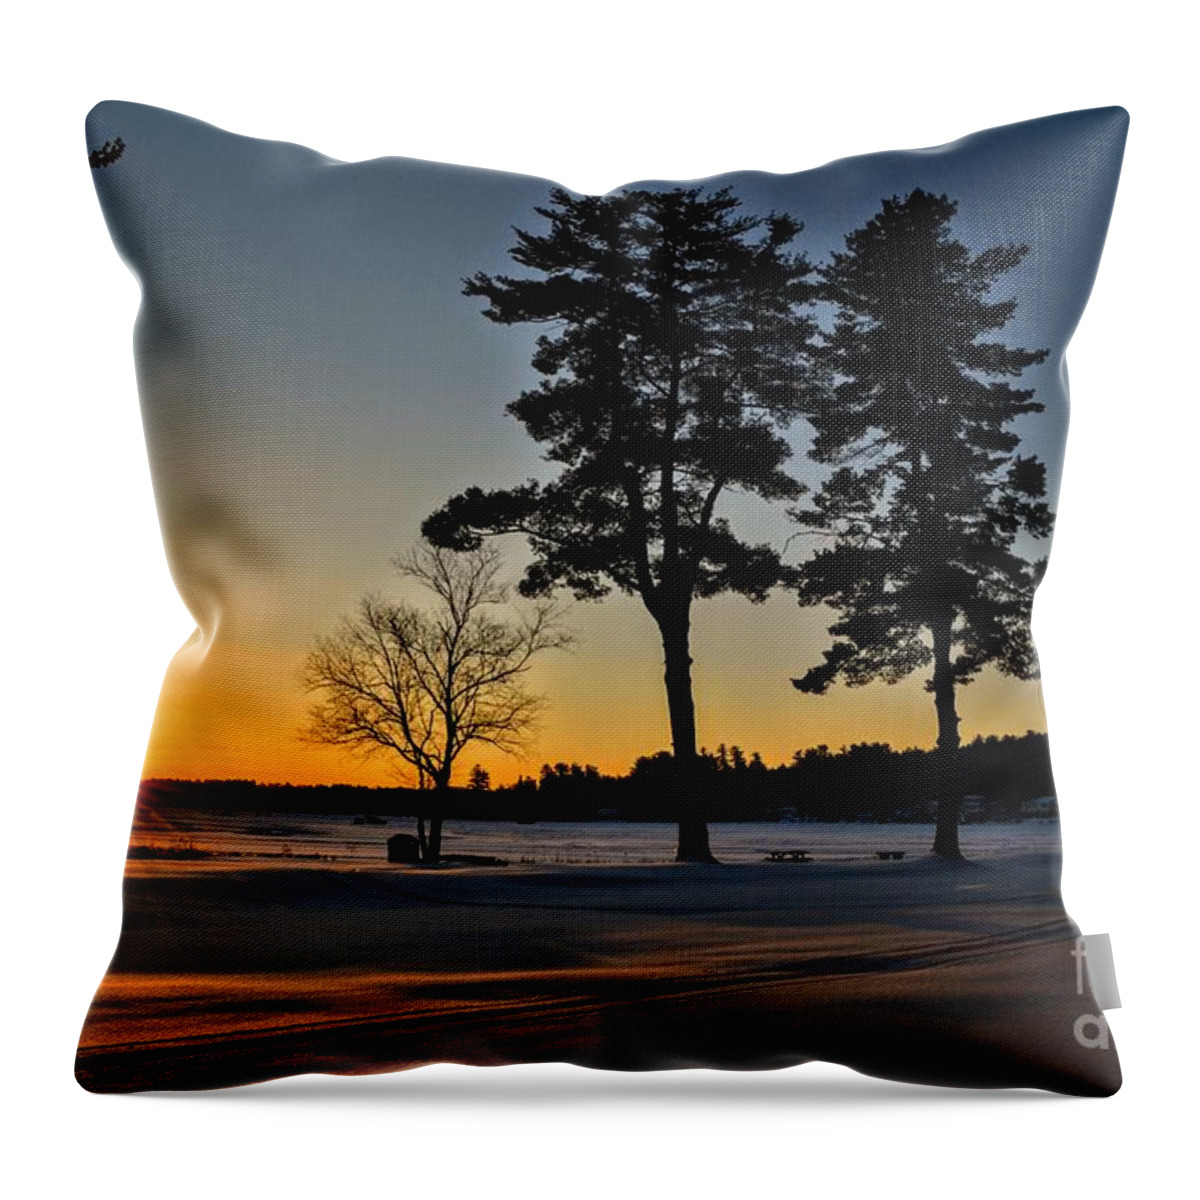 Webster Lake Throw Pillow featuring the photograph Sunday Funday - Webster Lake, New Hampshire by Dave Pellegrini